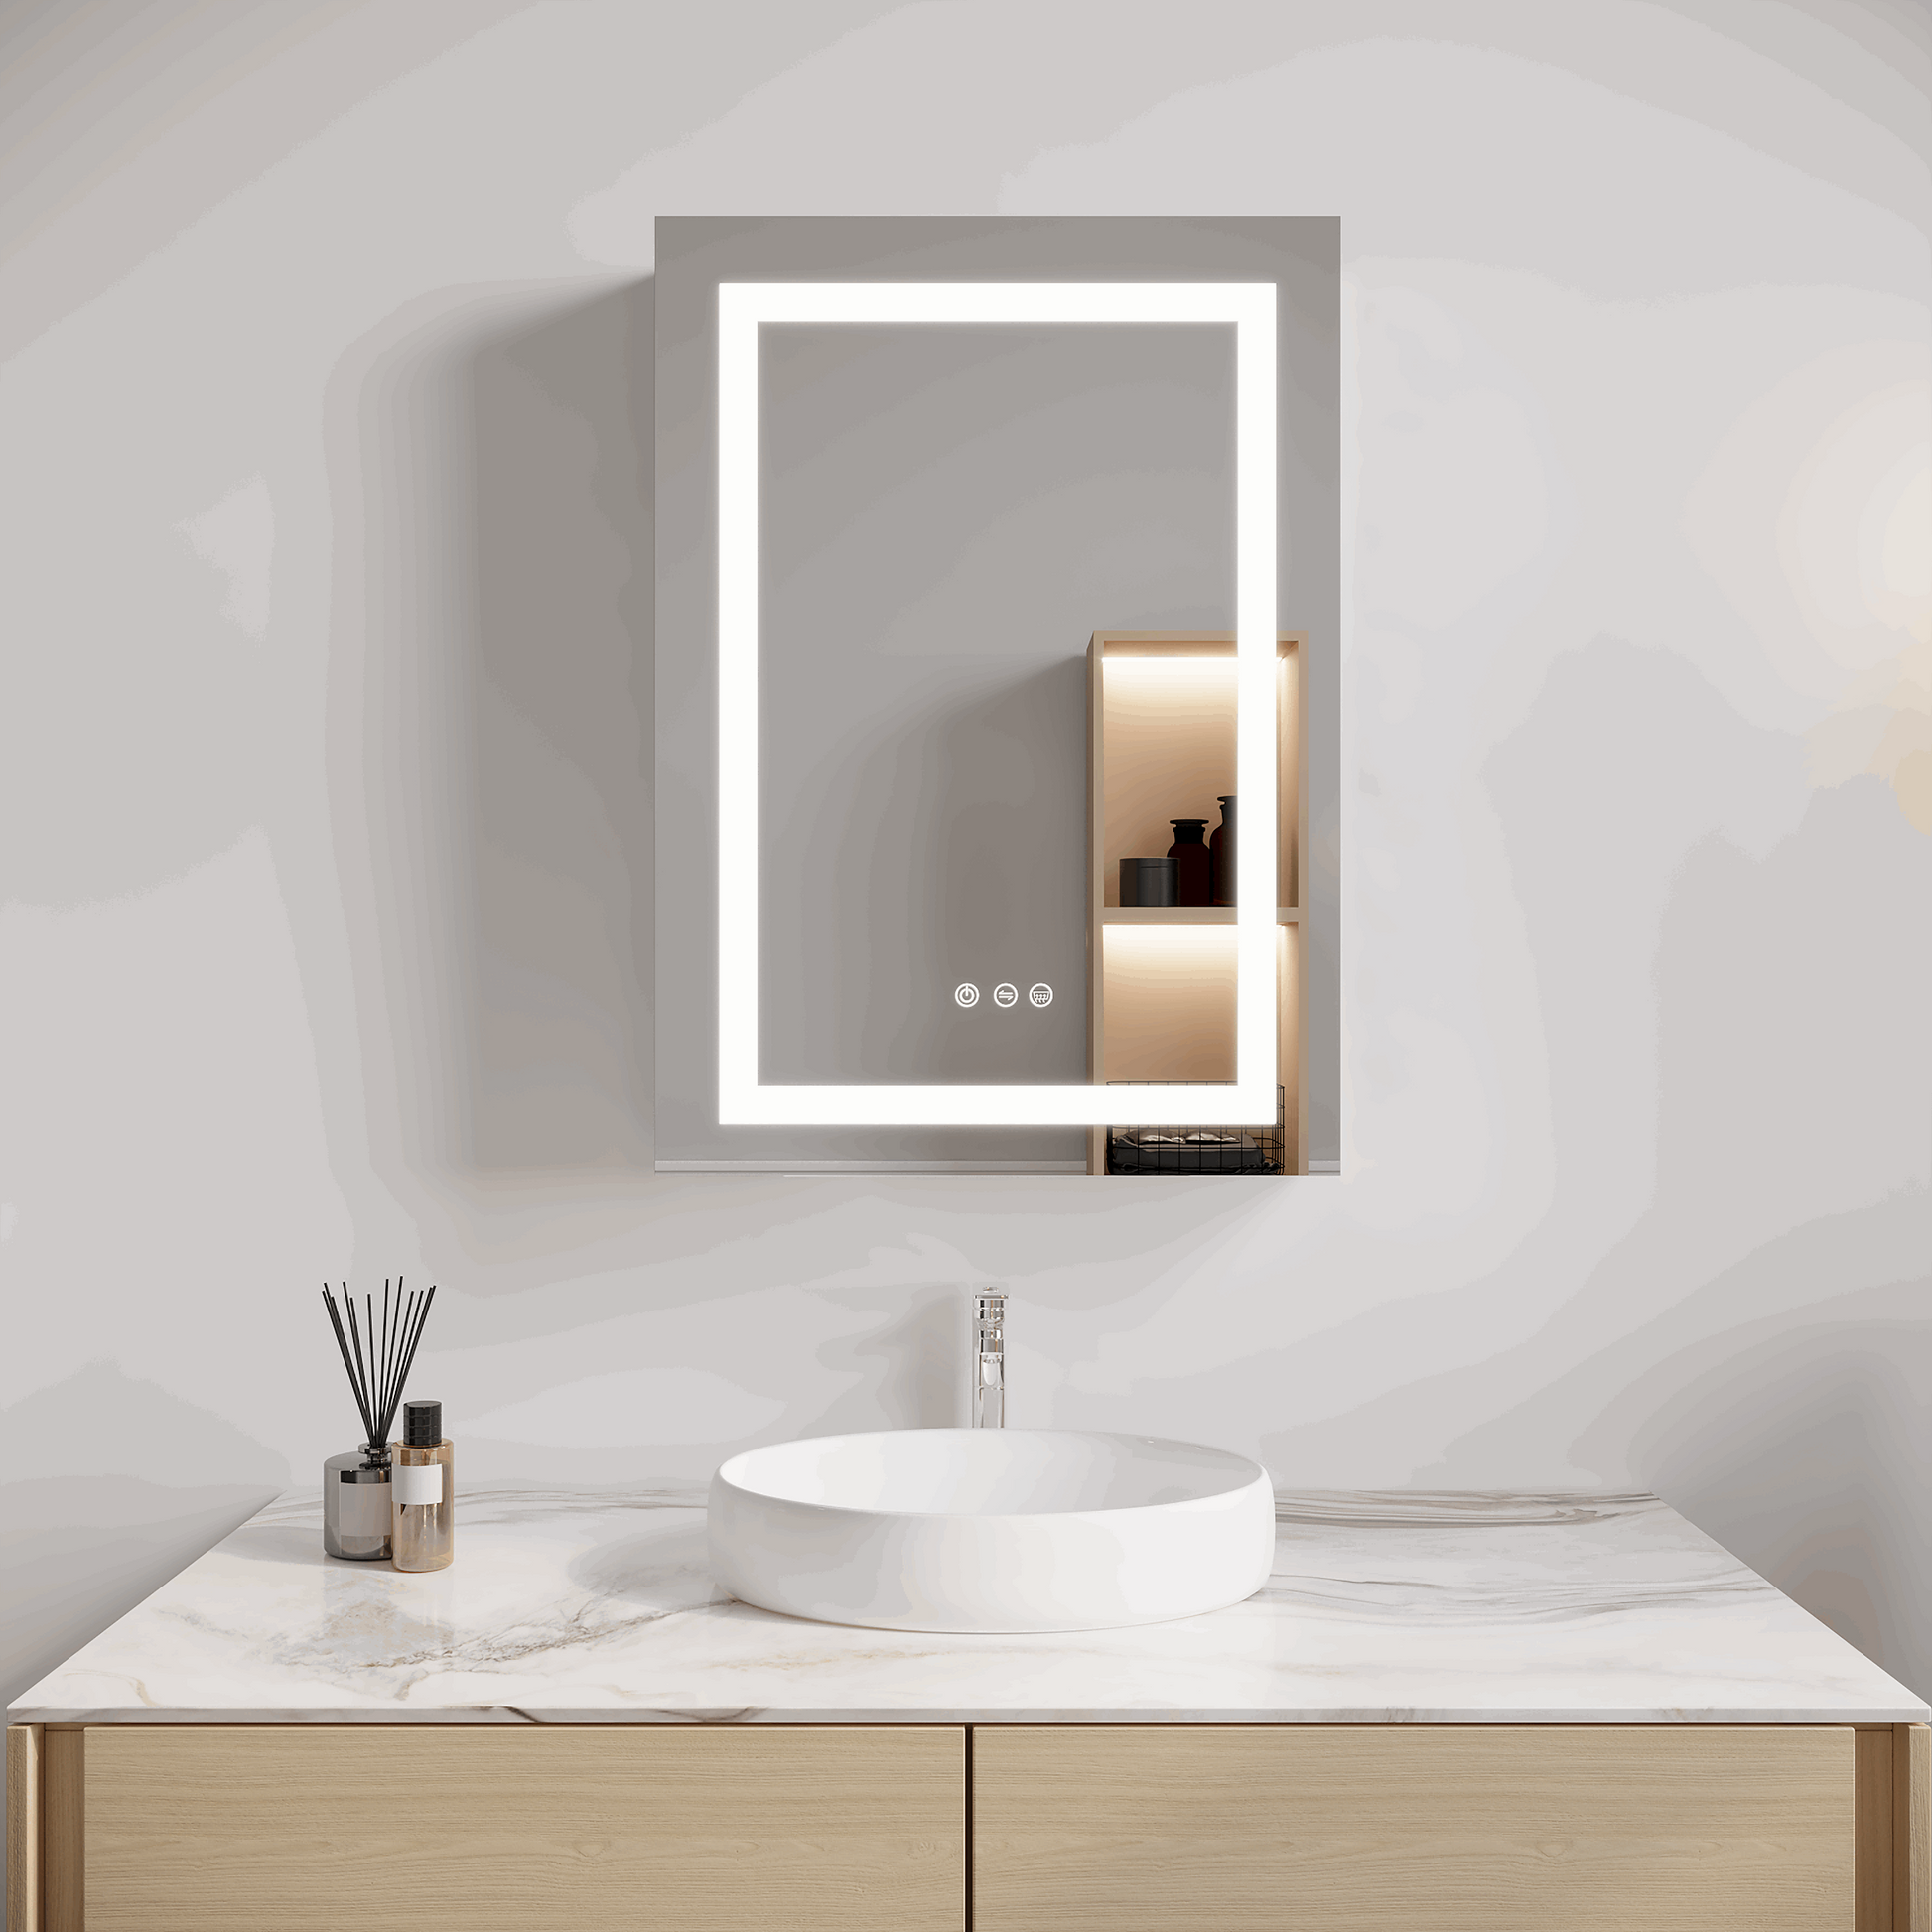 26x20 inch Bathroom Medicine Cabinet with LED Mirror, Anti-Fog, Waterproof, 3000K~6000K Single Door Lighted Bathroom Cabinet with Touch Swich, Dimmable,Recessed or Surface Mount (Left Door)